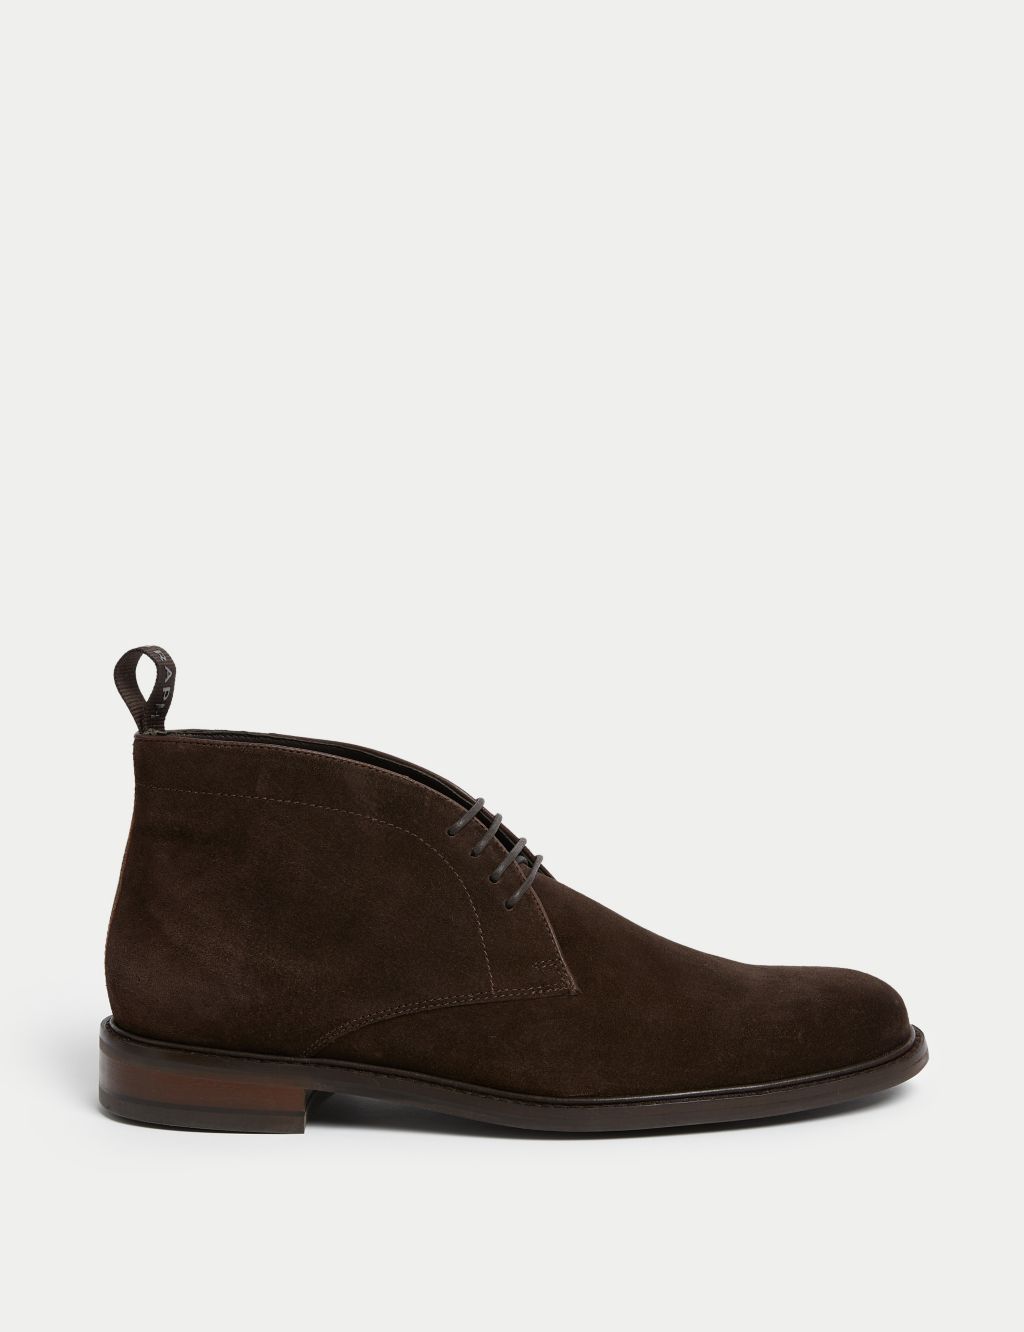 Suede Chukka Boots image 1